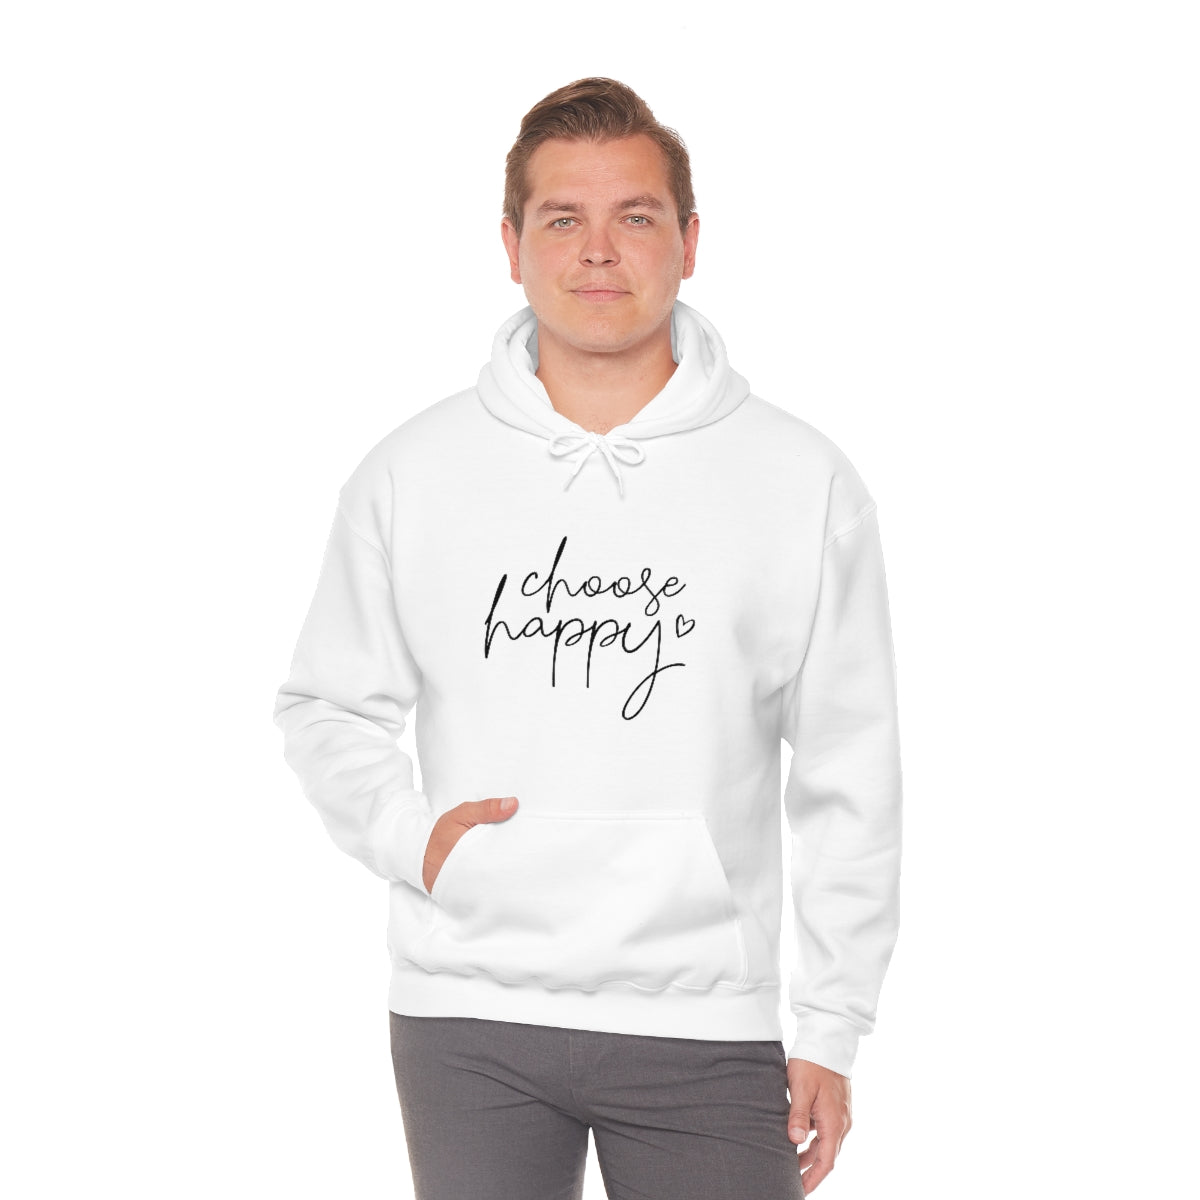 Choose Happiness Every Day with Our "Choose Happy" Sweatshirt -Shirt